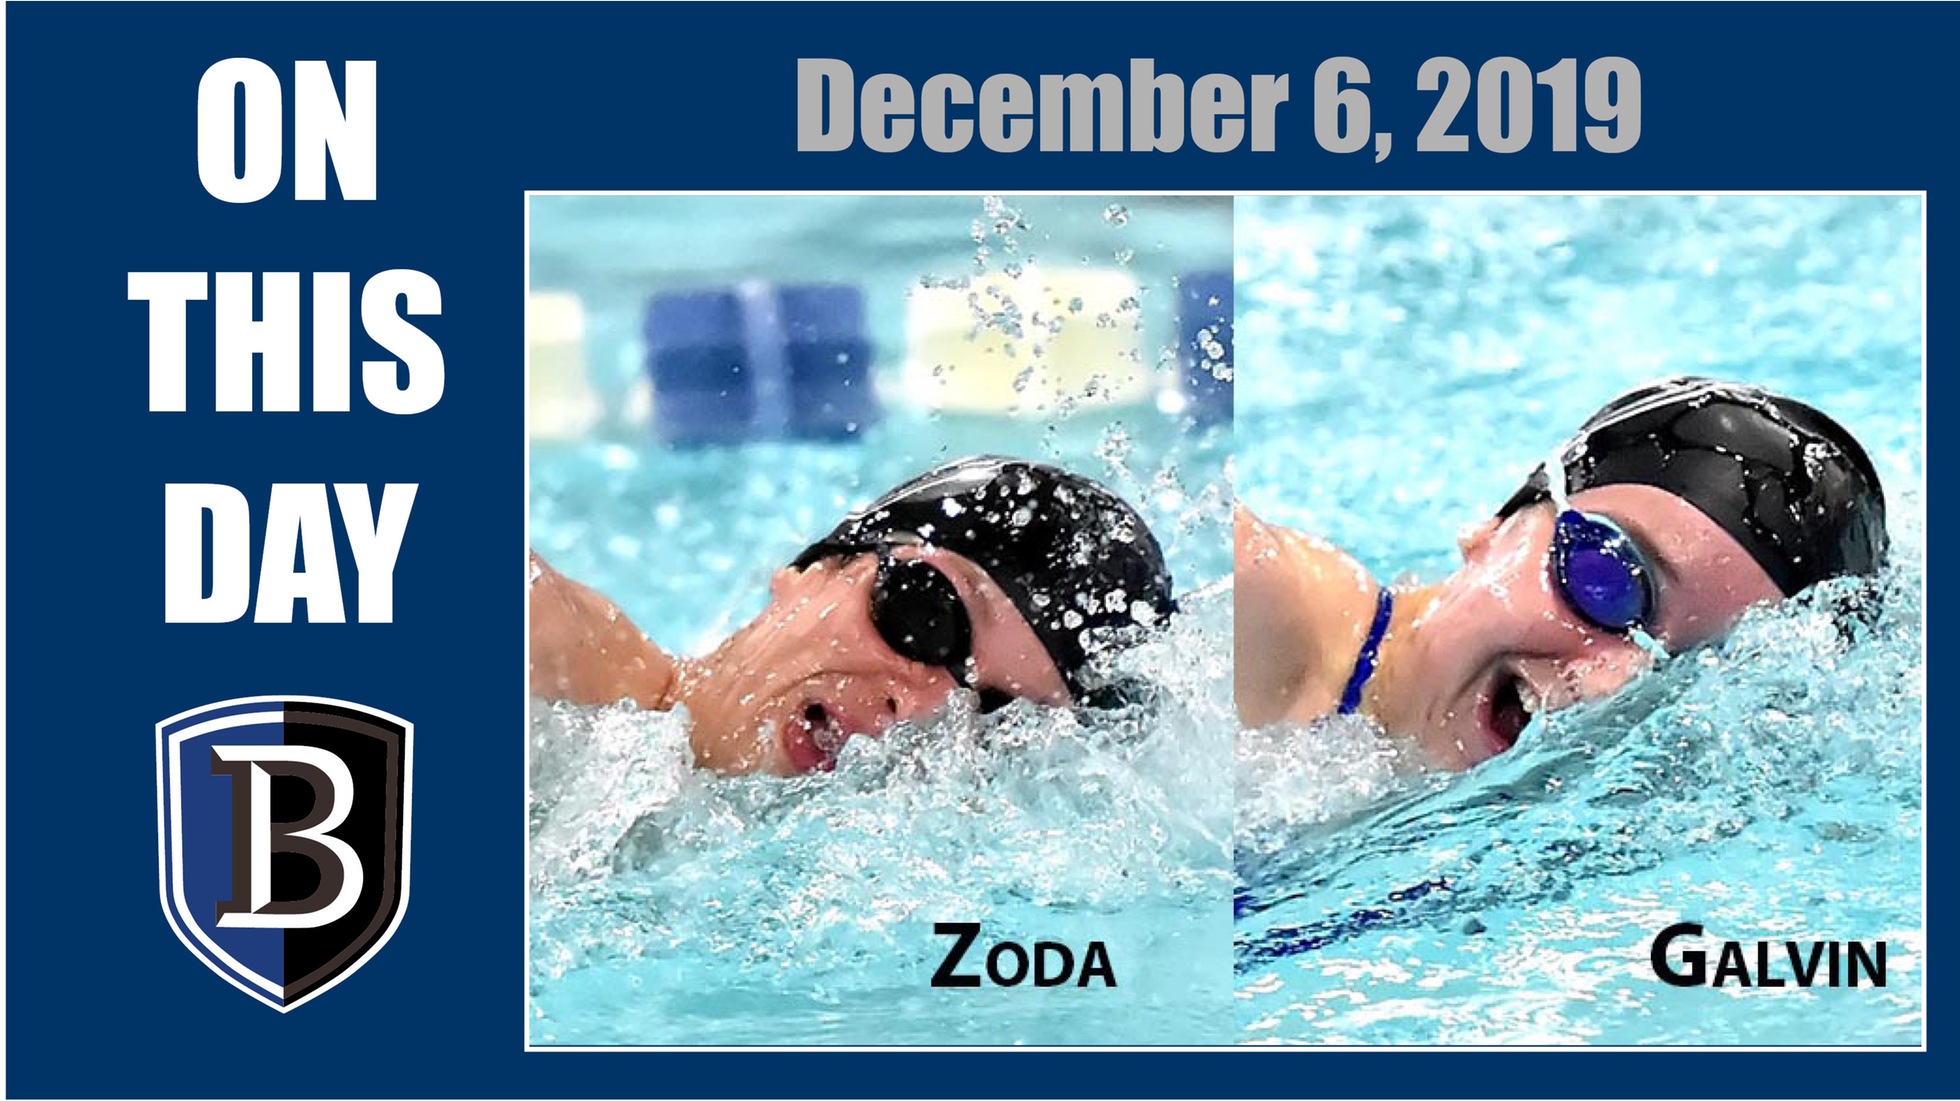 Graphic featuring Mark Zoda and Kate Galvin